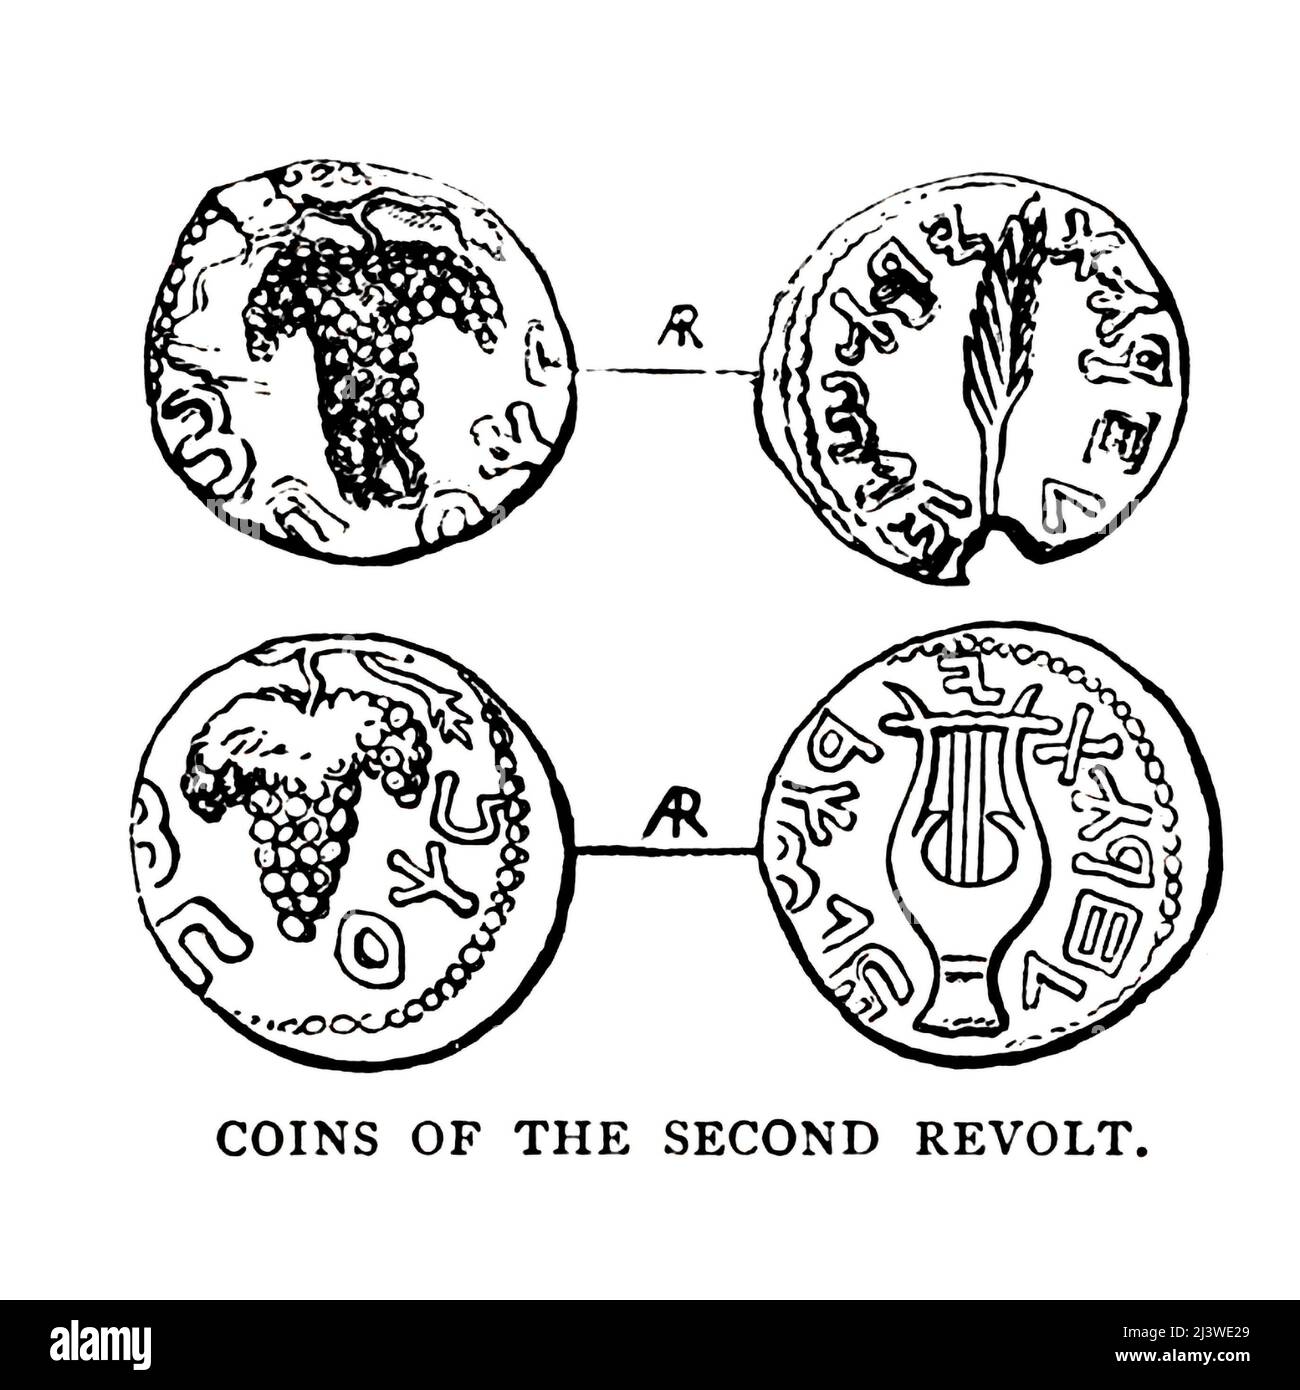 COINS OF THE SECOND REVOLT  Simon Bar Cochab, in A. D. 132 announced himself as the Messiah, calling himself the son of a star (Bar Cochab), and quoting as his warrant the words in Num. xxiv. 1 7, ' The Star out of Jacob.' His coins bear Jewish emblems, the palm- tree, lyre, vine-leaf, wheat, grapes, and the Temple, and noticeably the star above the Temple Illustration of ancient Biblical time coin from the book '  The money of the Bible ' by George Charles Williamson, Publisher: London, The Religious Tract Society 1894 Stock Photo